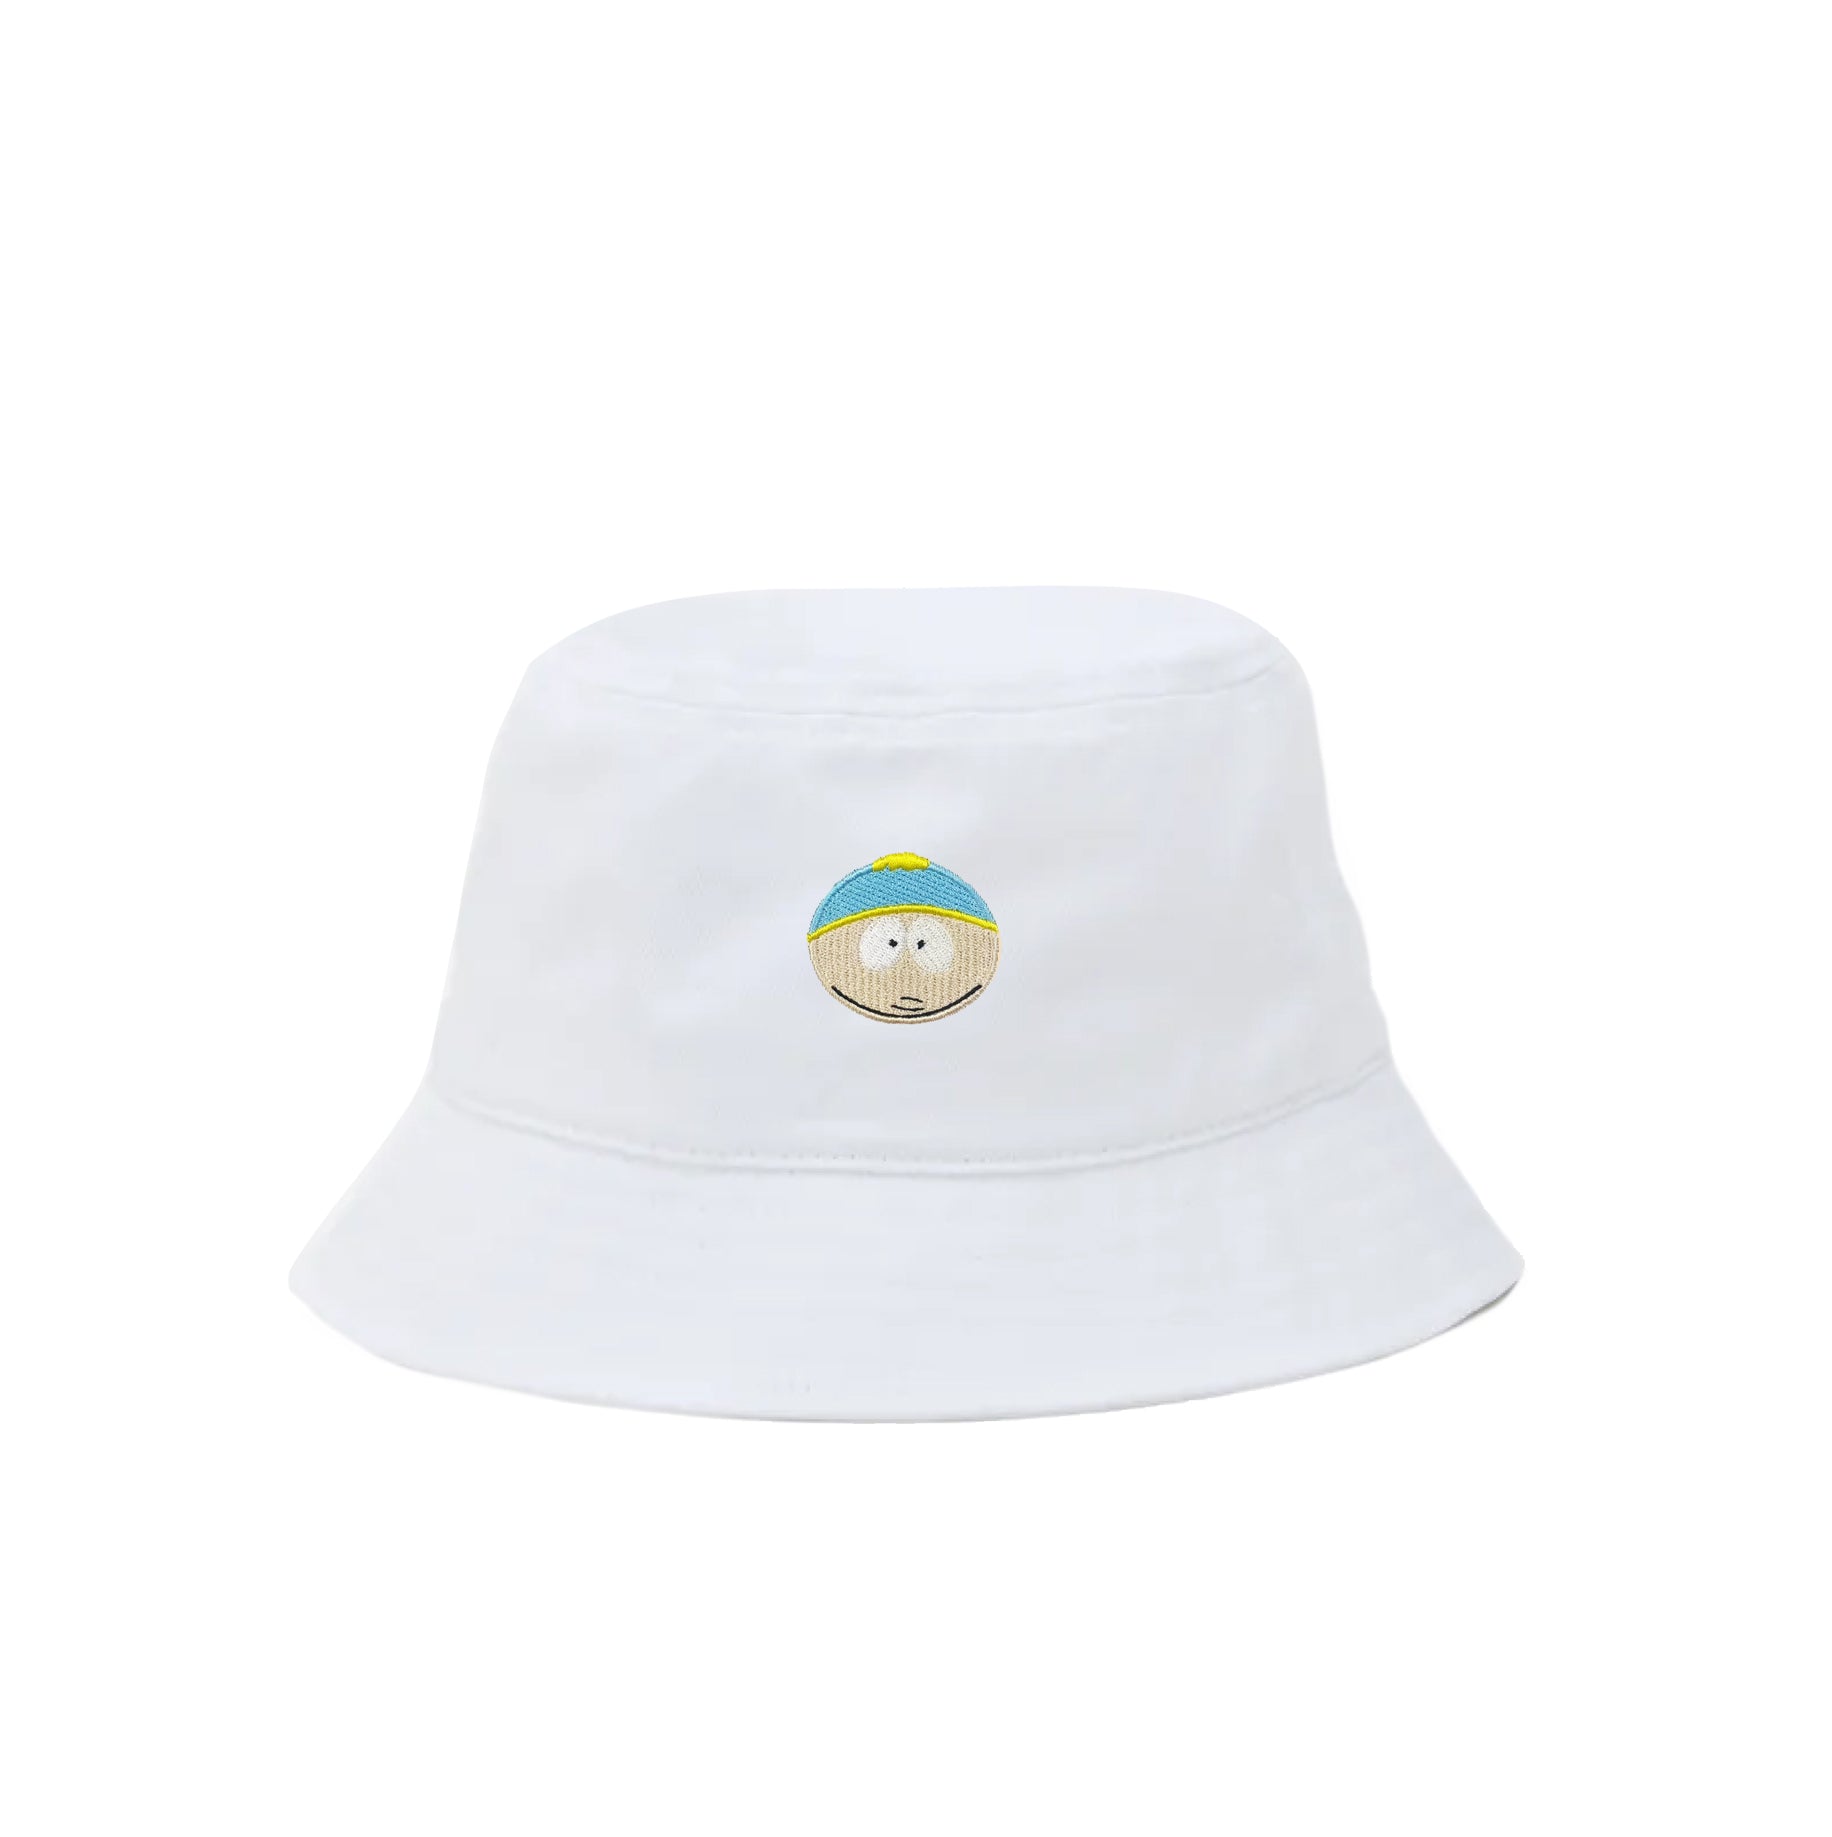 Faces Of South Park Bucket Hat